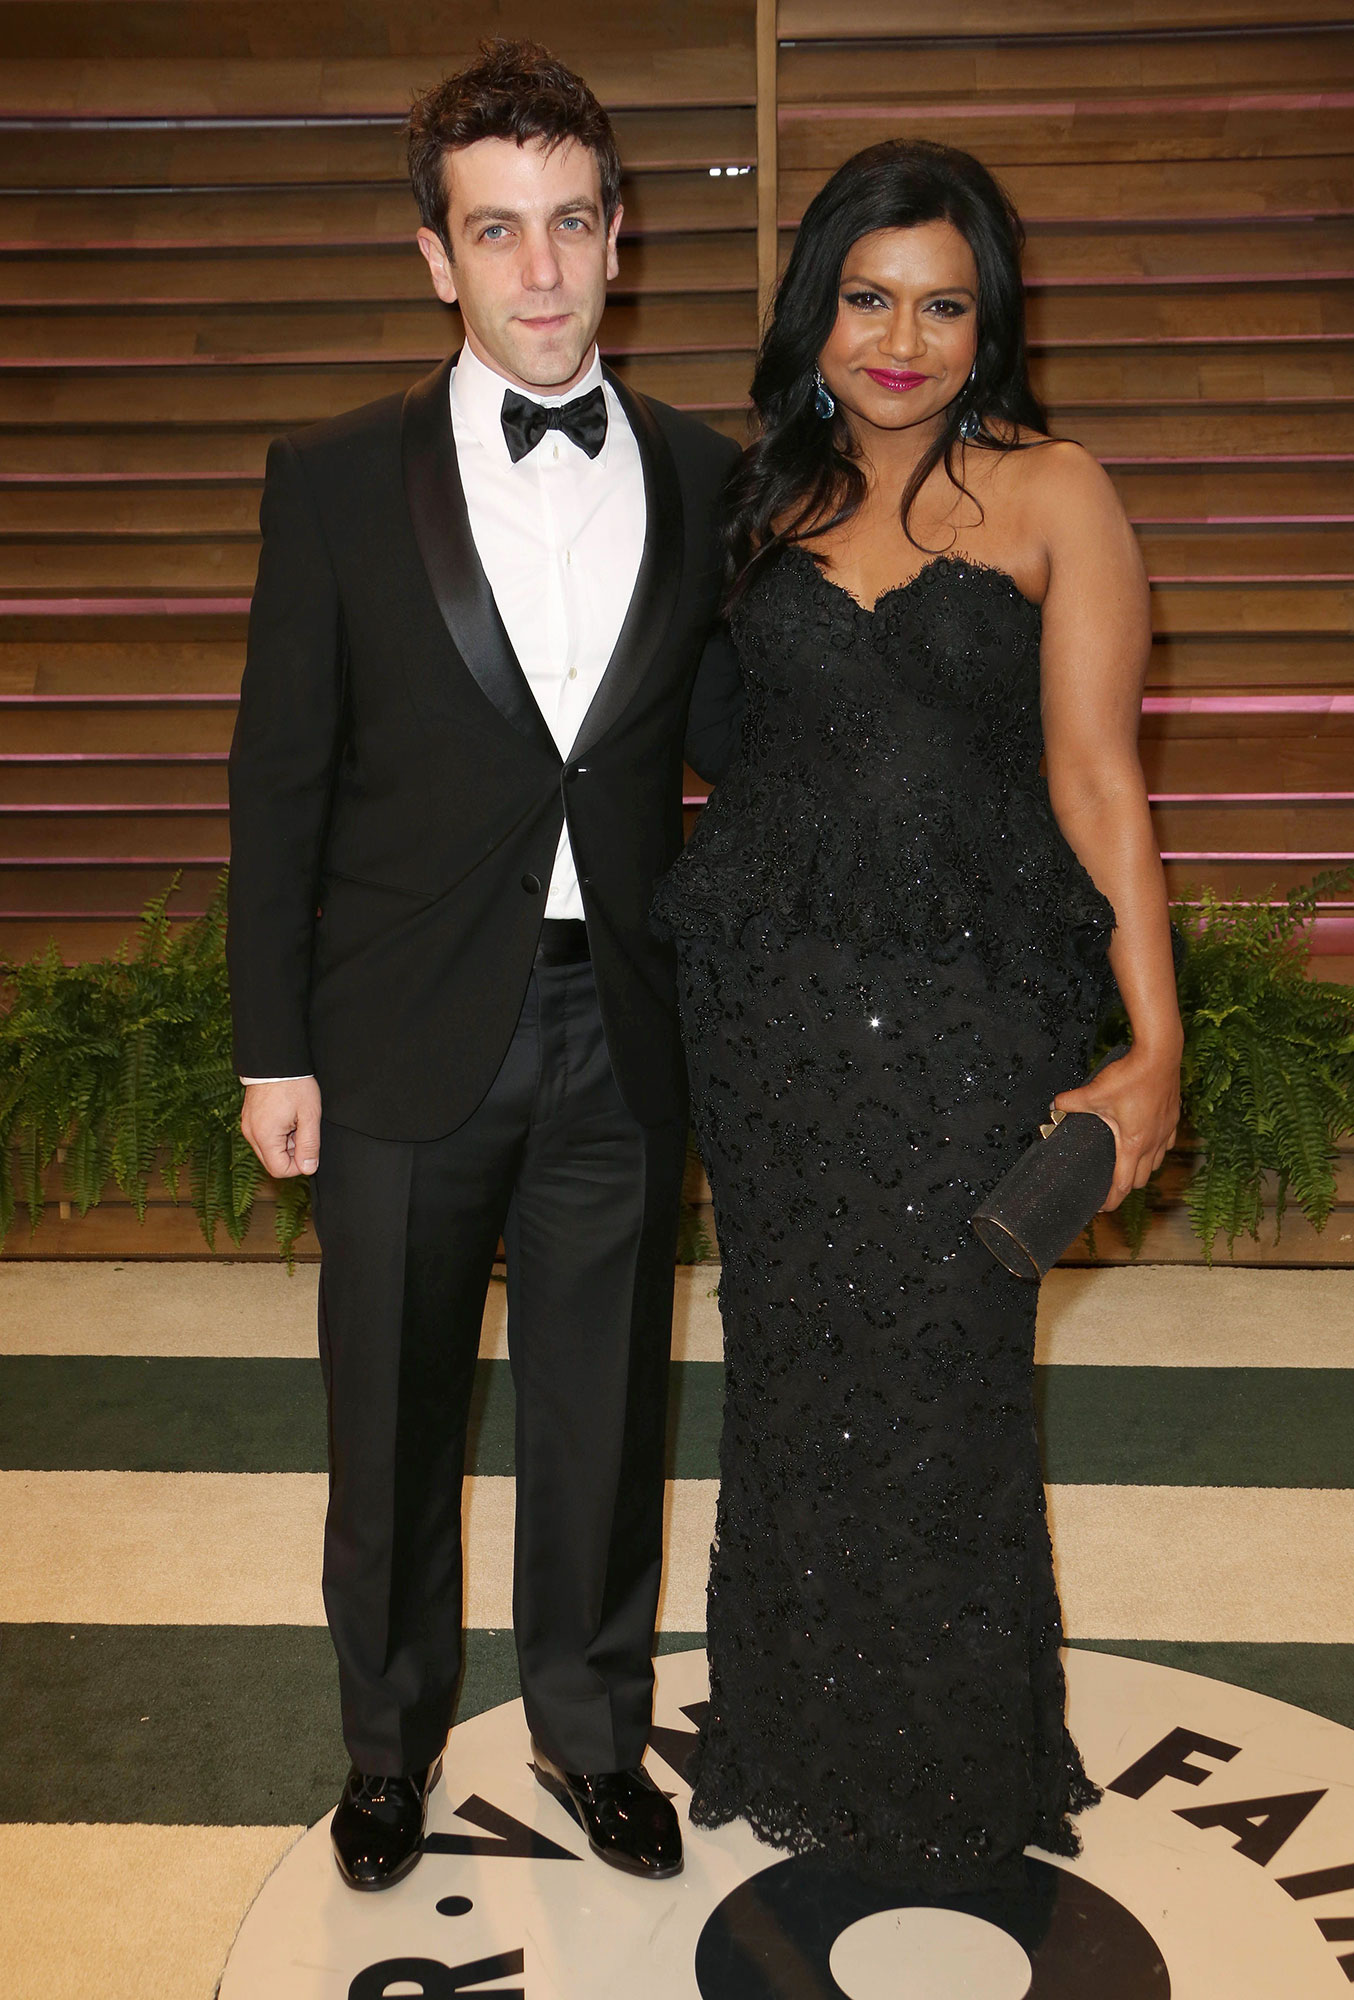 2014 Stop being proud of me Mindy Kaling and BJ Novak Friendship